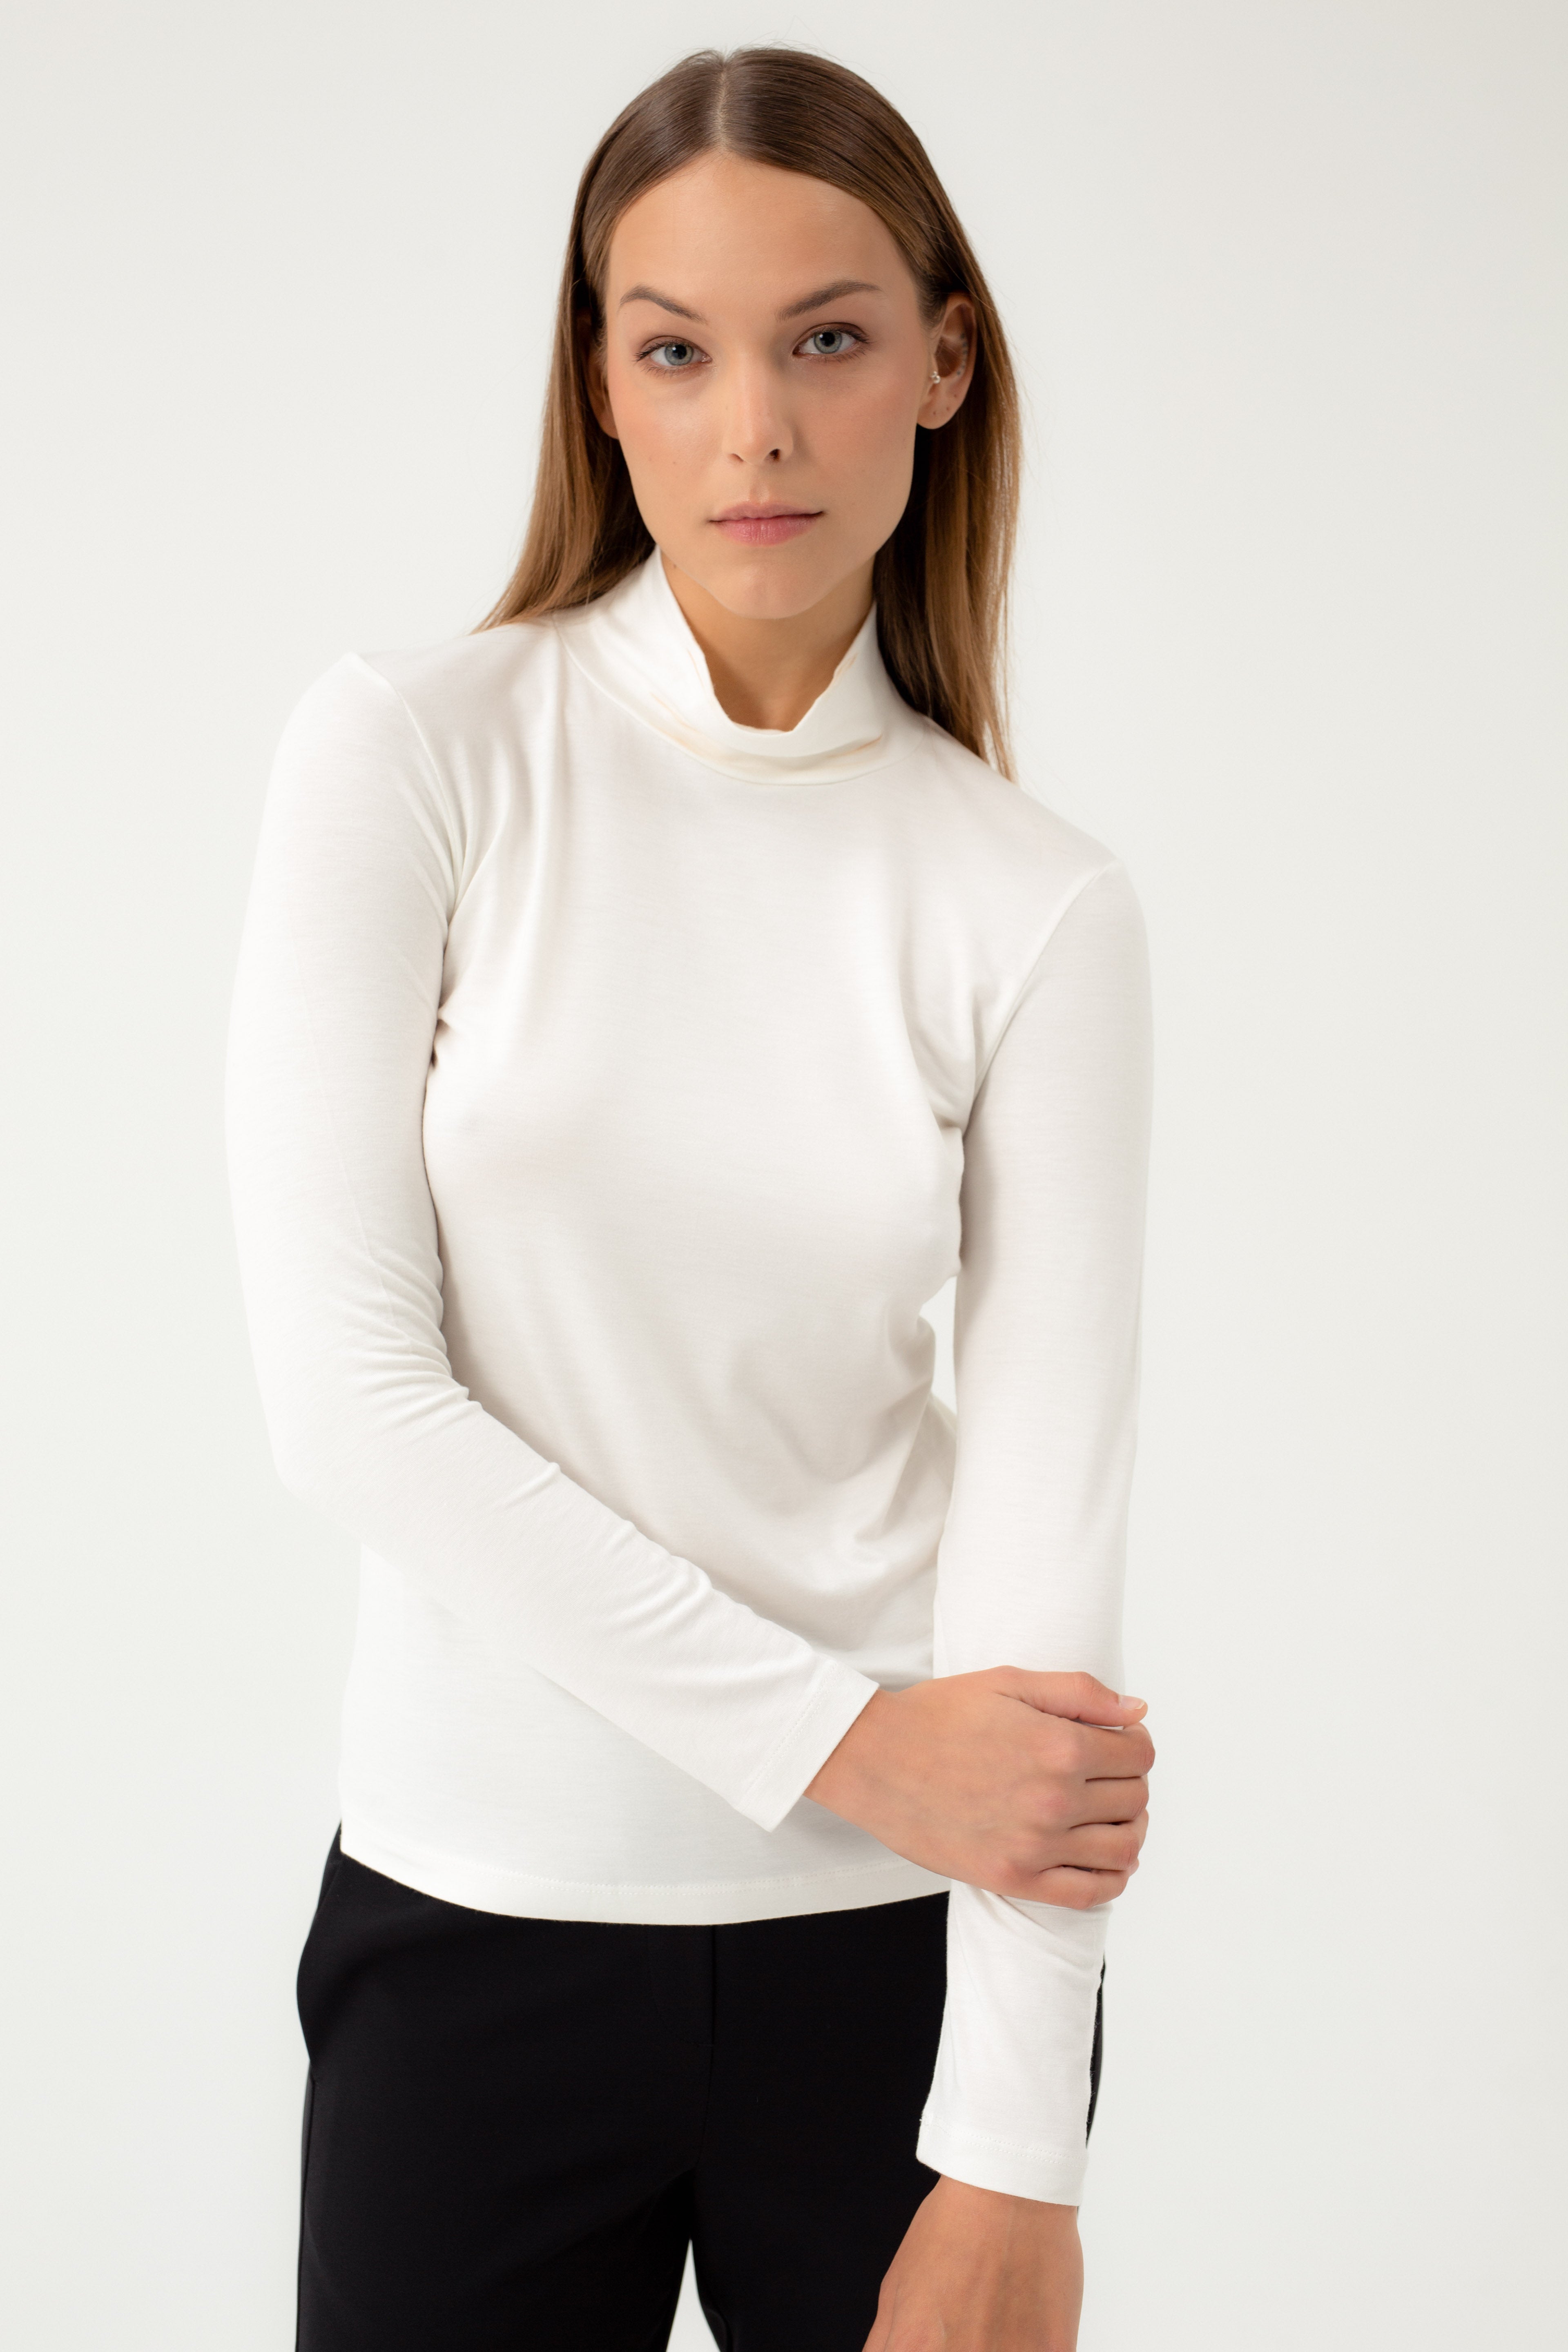 MILK JERSEY BLOUSE WITH HIGH NECK